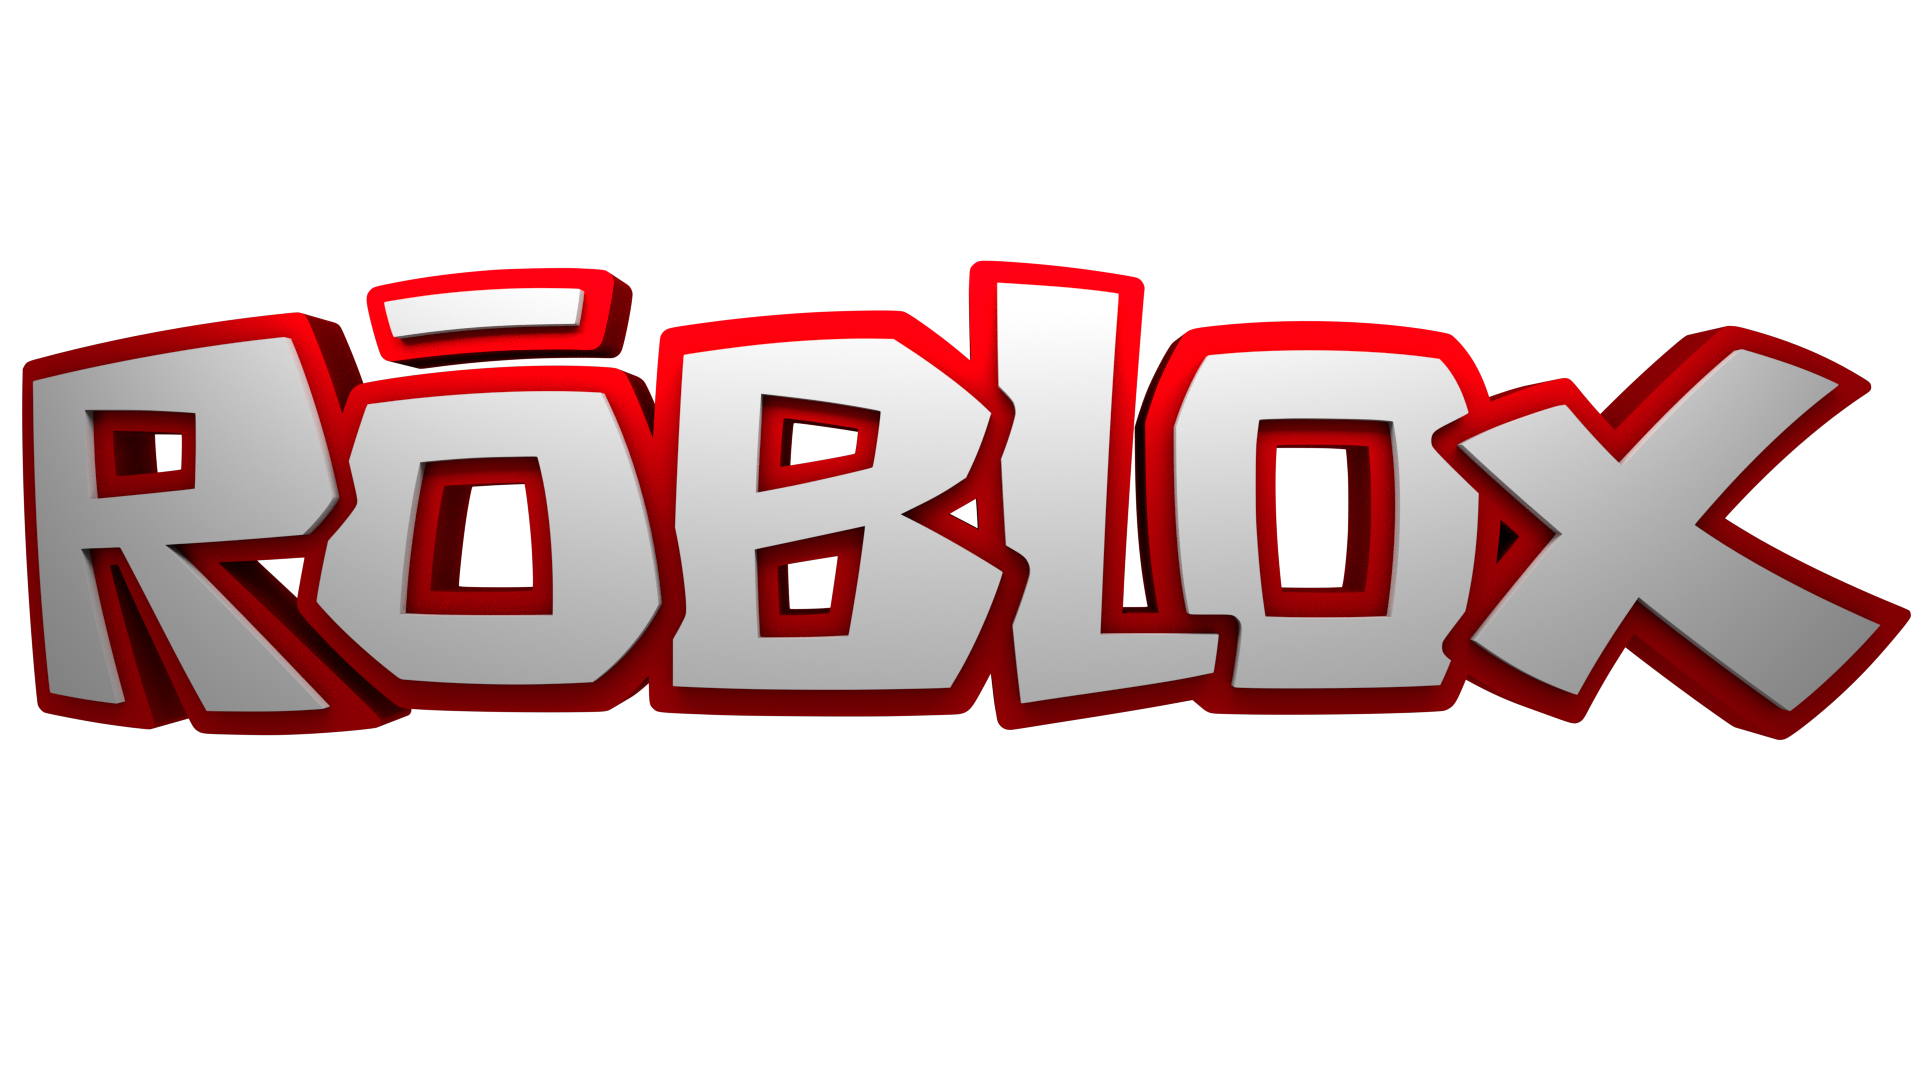 All Roblox Logos Images